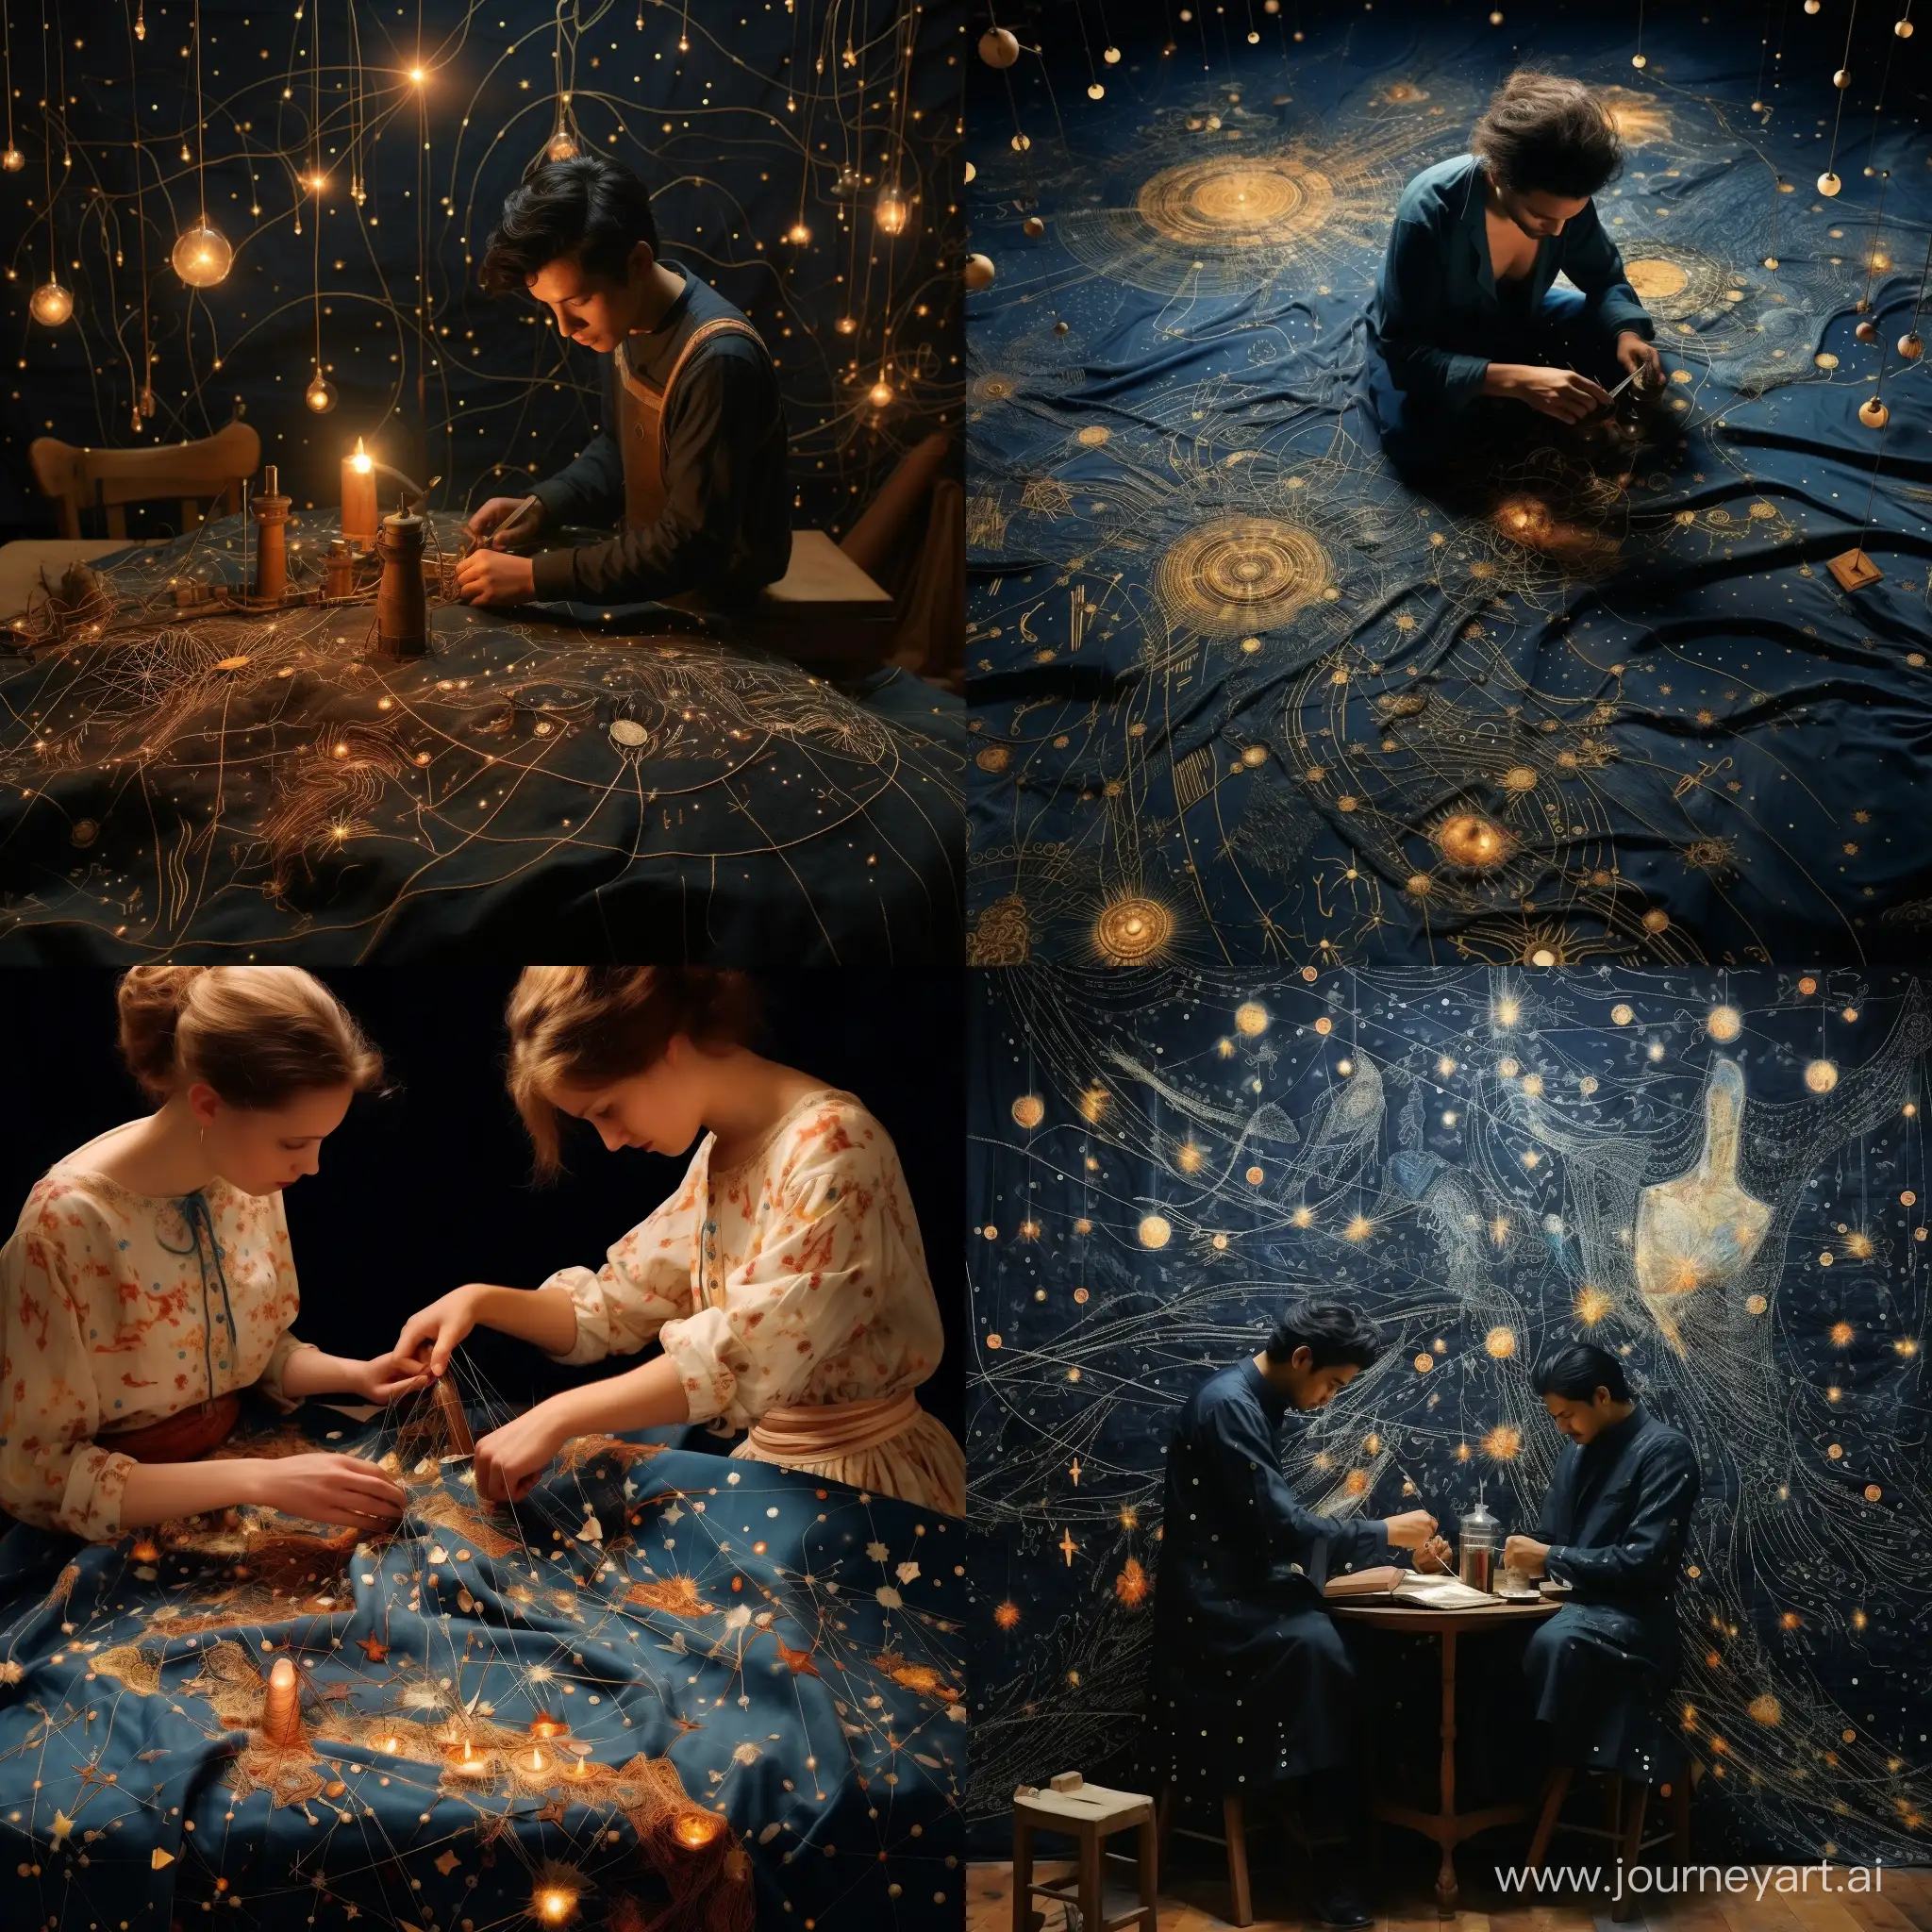 Master-Tailors-Craft-Celestial-Constellations-in-Stunning-Artistic-Display